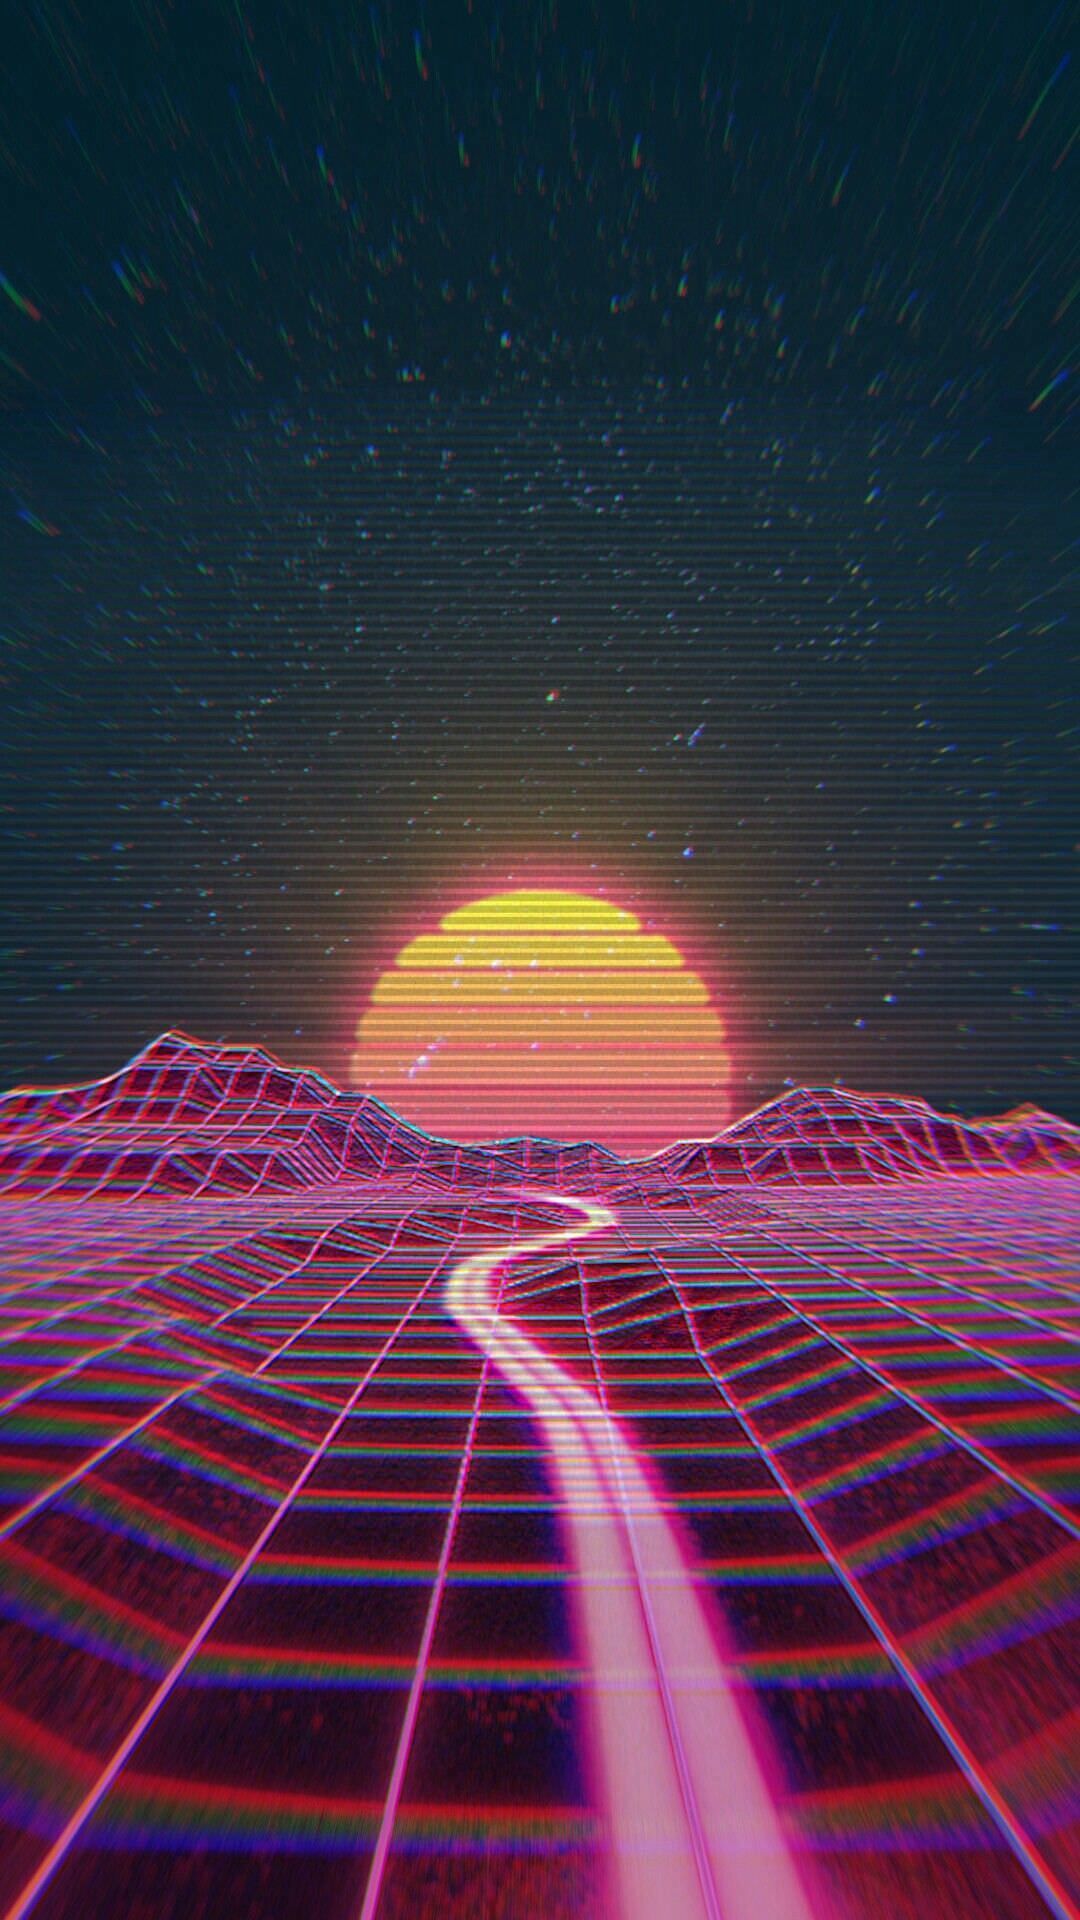 Chill iPhone Wallpaper